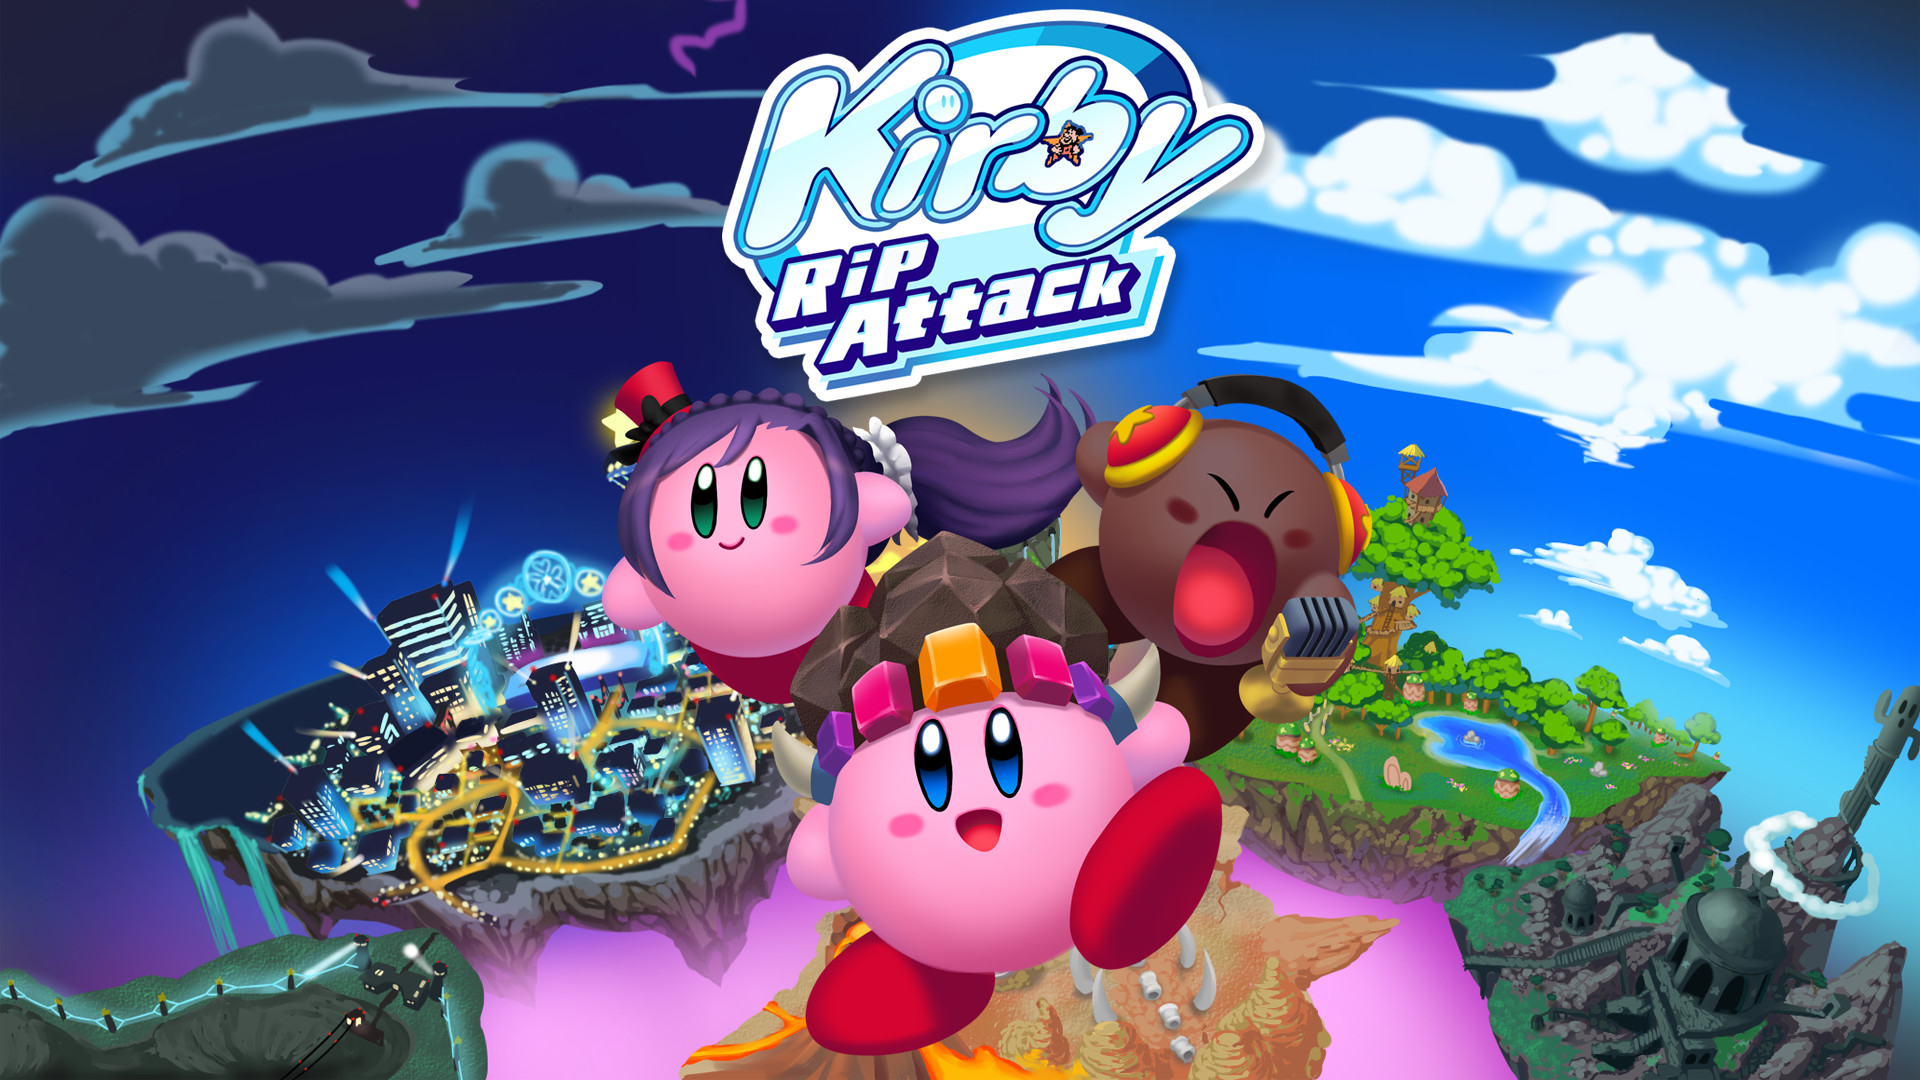 1920x1080 I just HAD to make a full wallpaper out of the amazing art for the new  Kirby album! So please use it however you like.